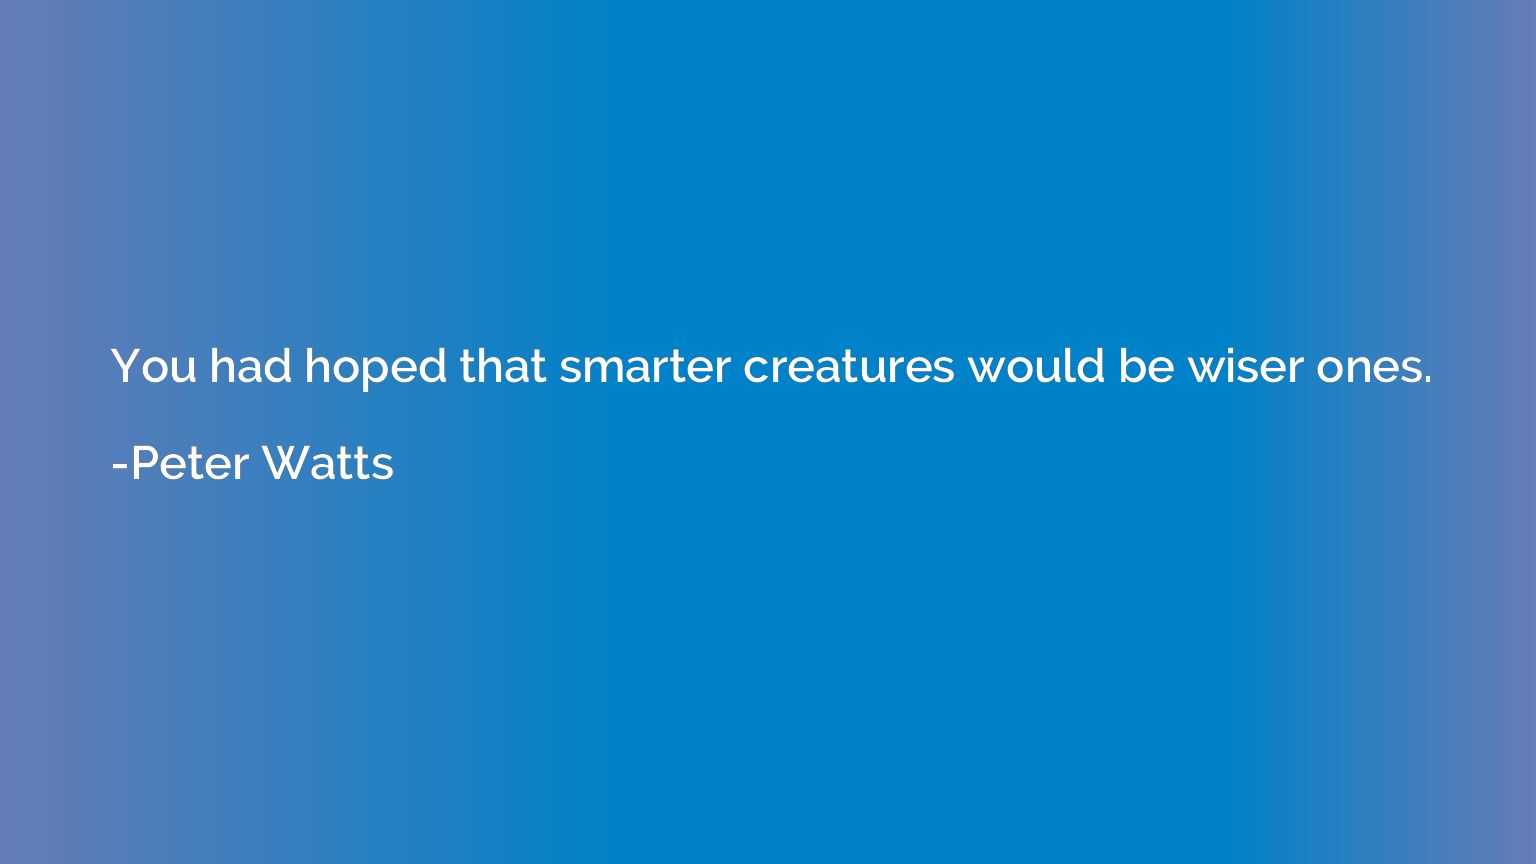 You had hoped that smarter creatures would be wiser ones.